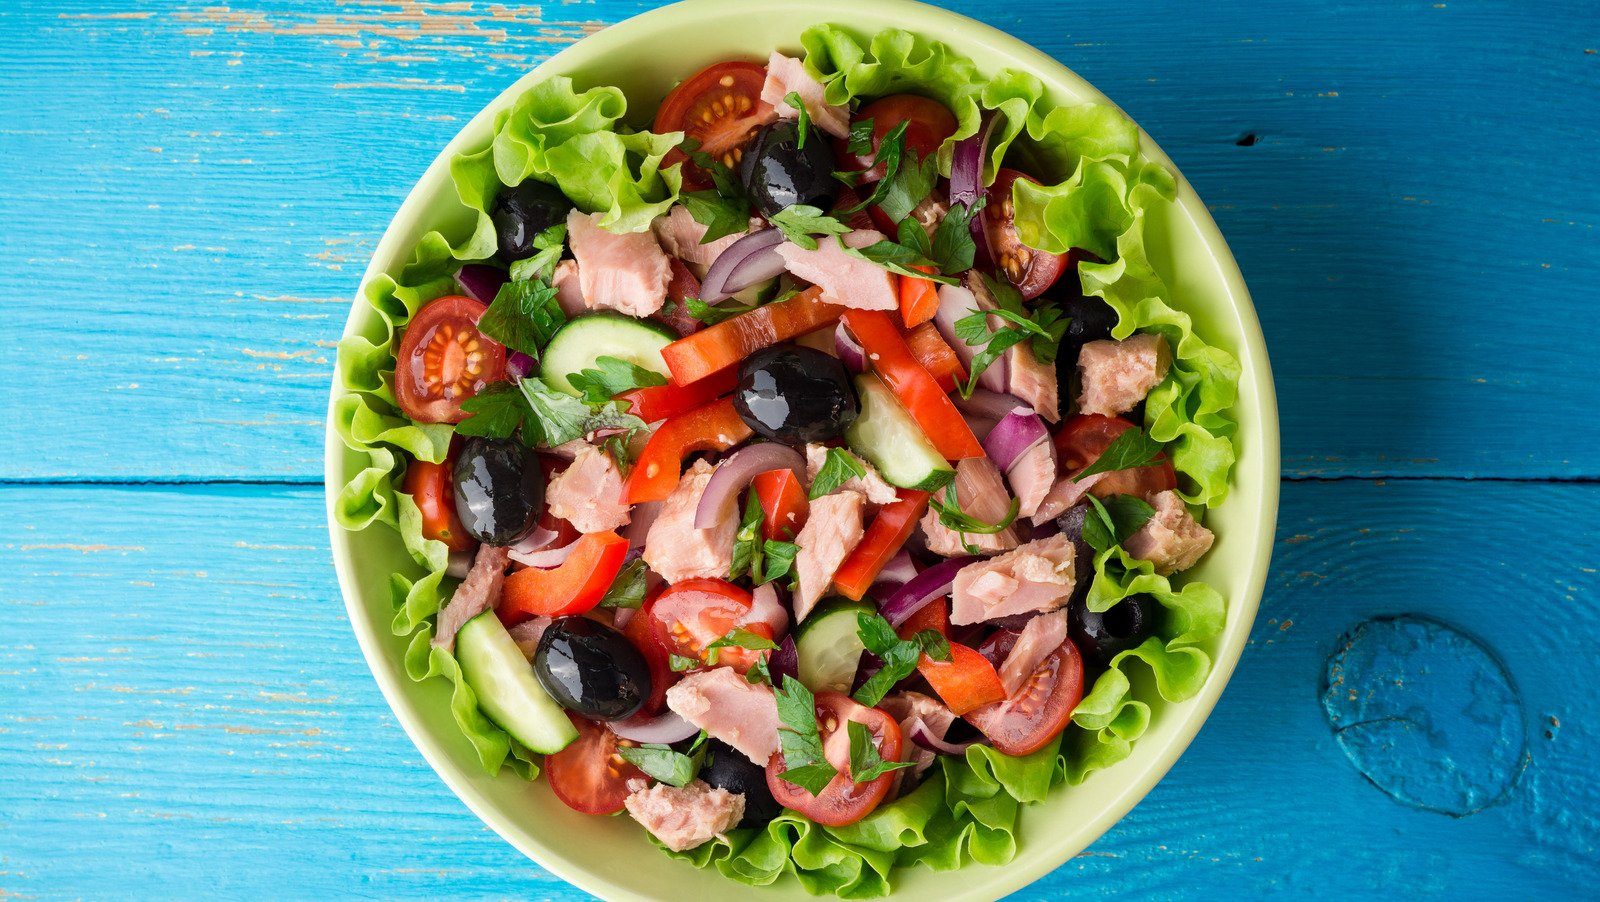 The Absolute Best Salads In The U.S.